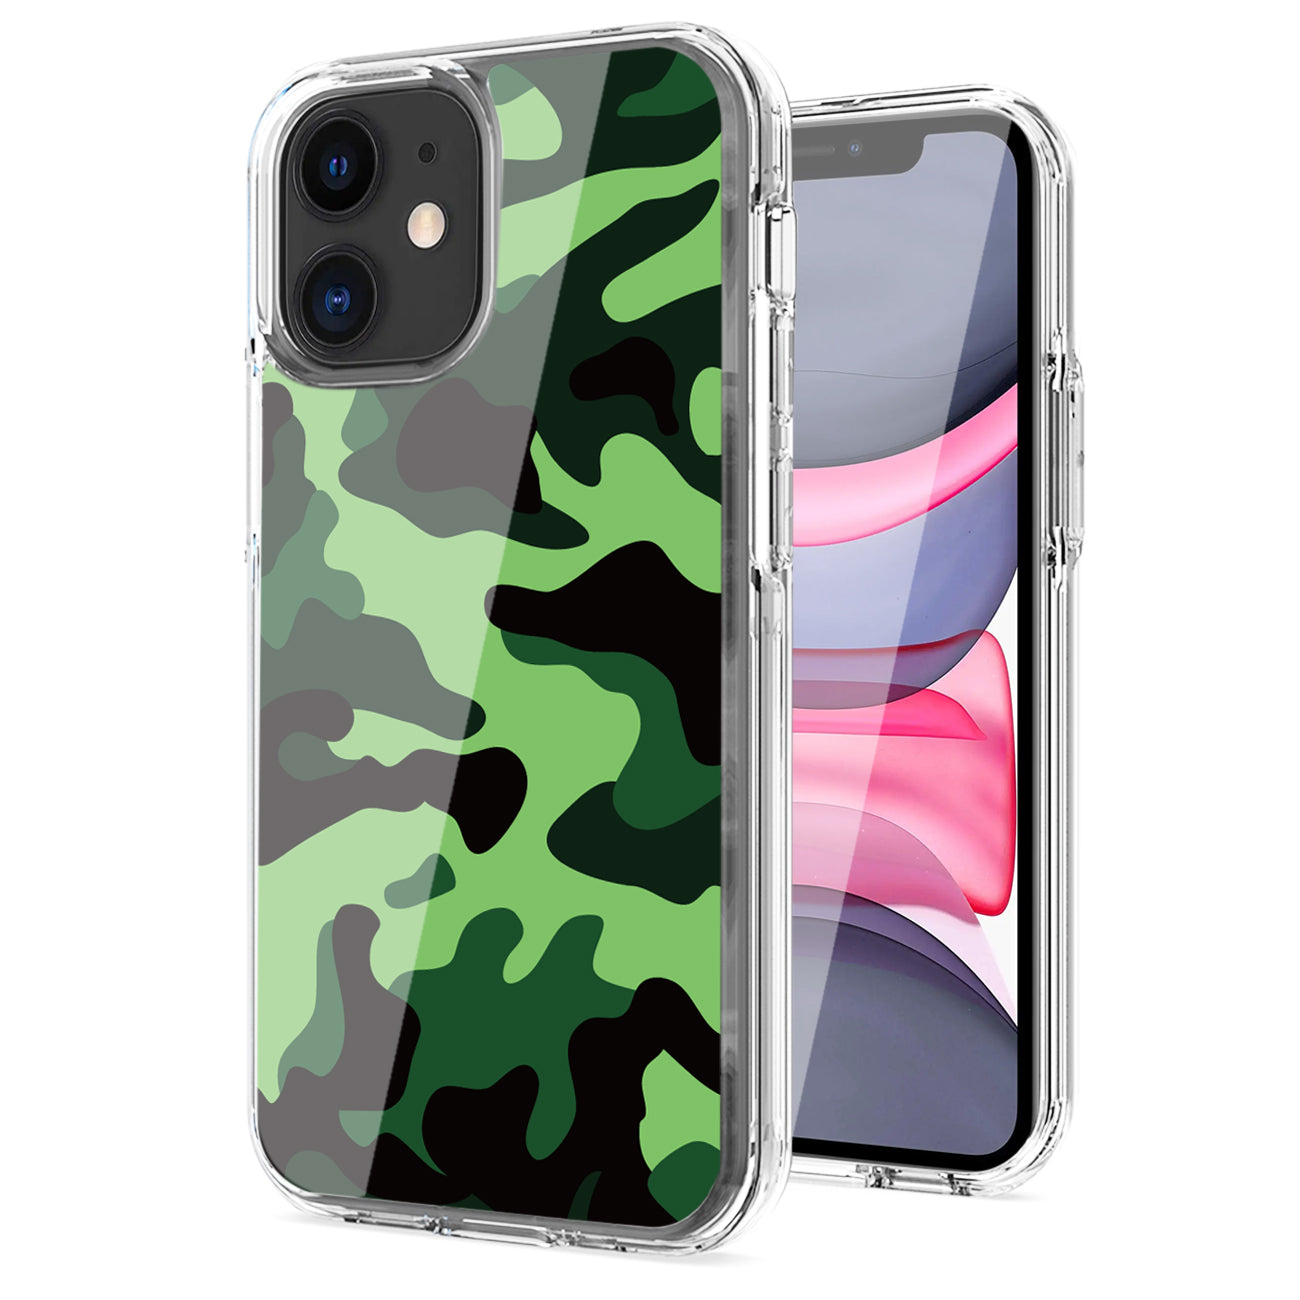 Camouflage Dual Layer Hybrid Hard & Soft TPU Rubber Case for IPH 11 In Mint Green